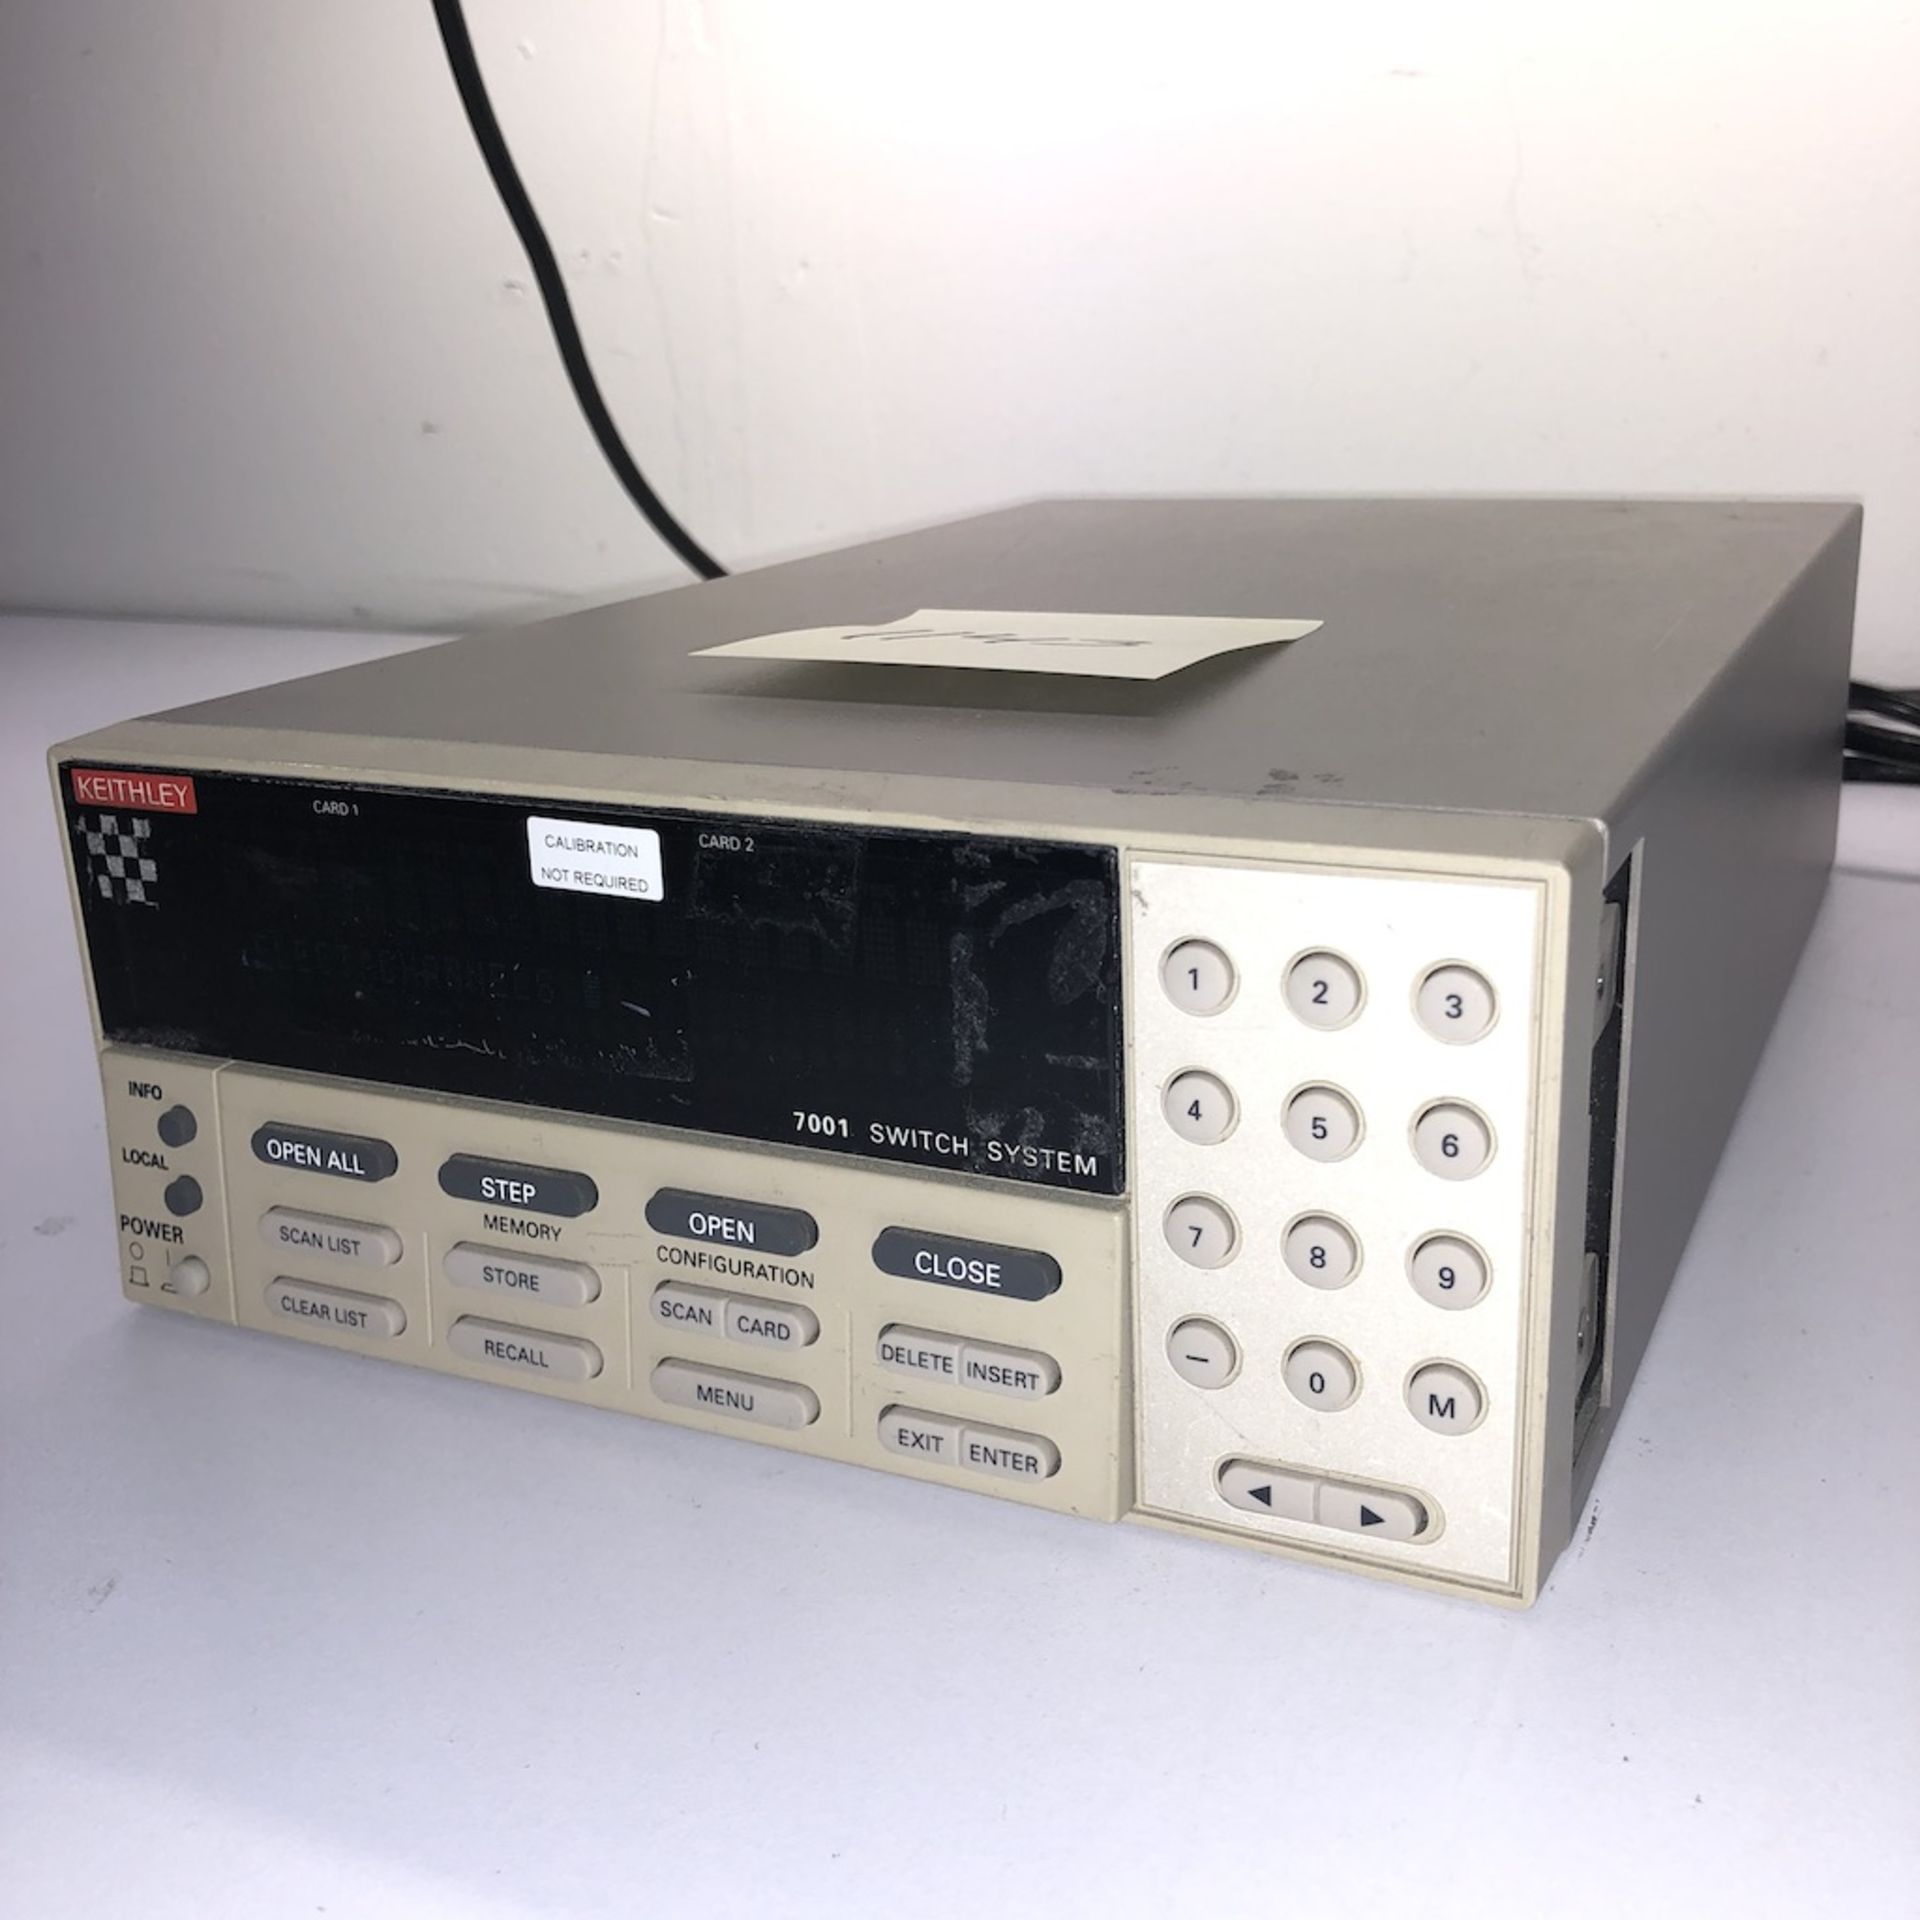 KEITHLEY 7001 SWITCH SYSTEM - Image 3 of 6